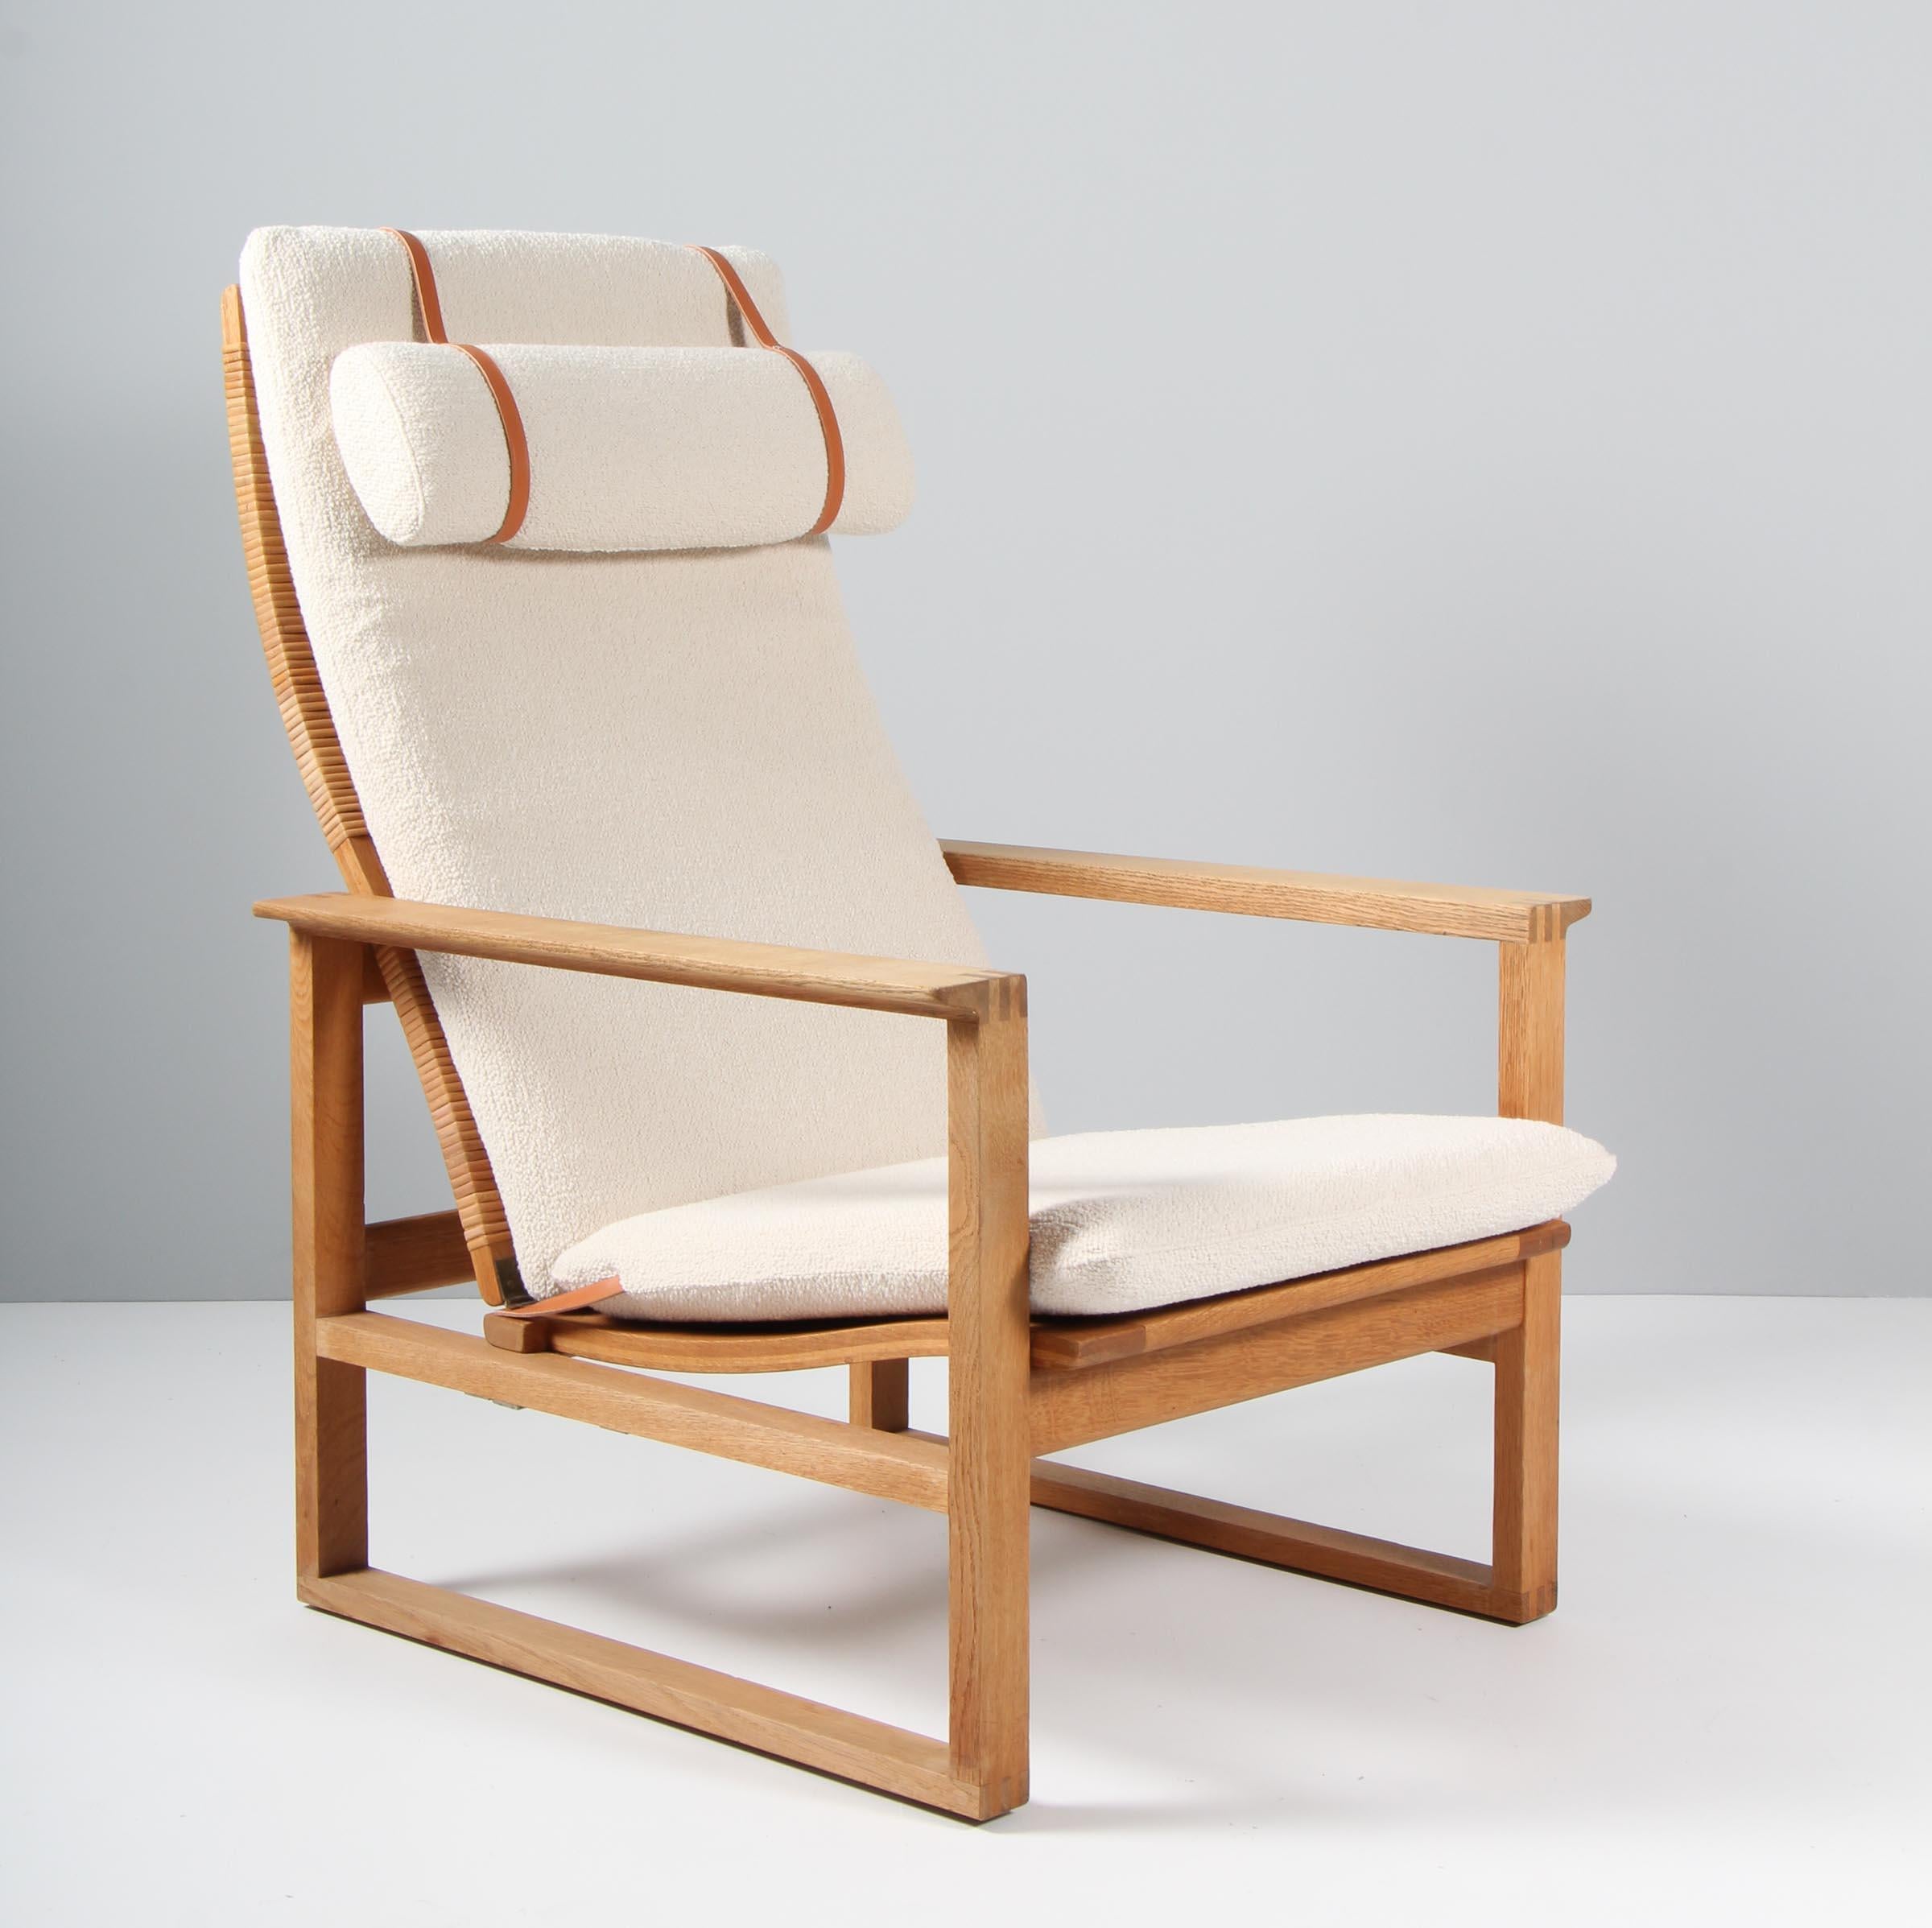 Mid-20th Century Børge Mogensen 2254 Oak Sled Lounge Chair and Ottoman in Cane, 1956, Denmark